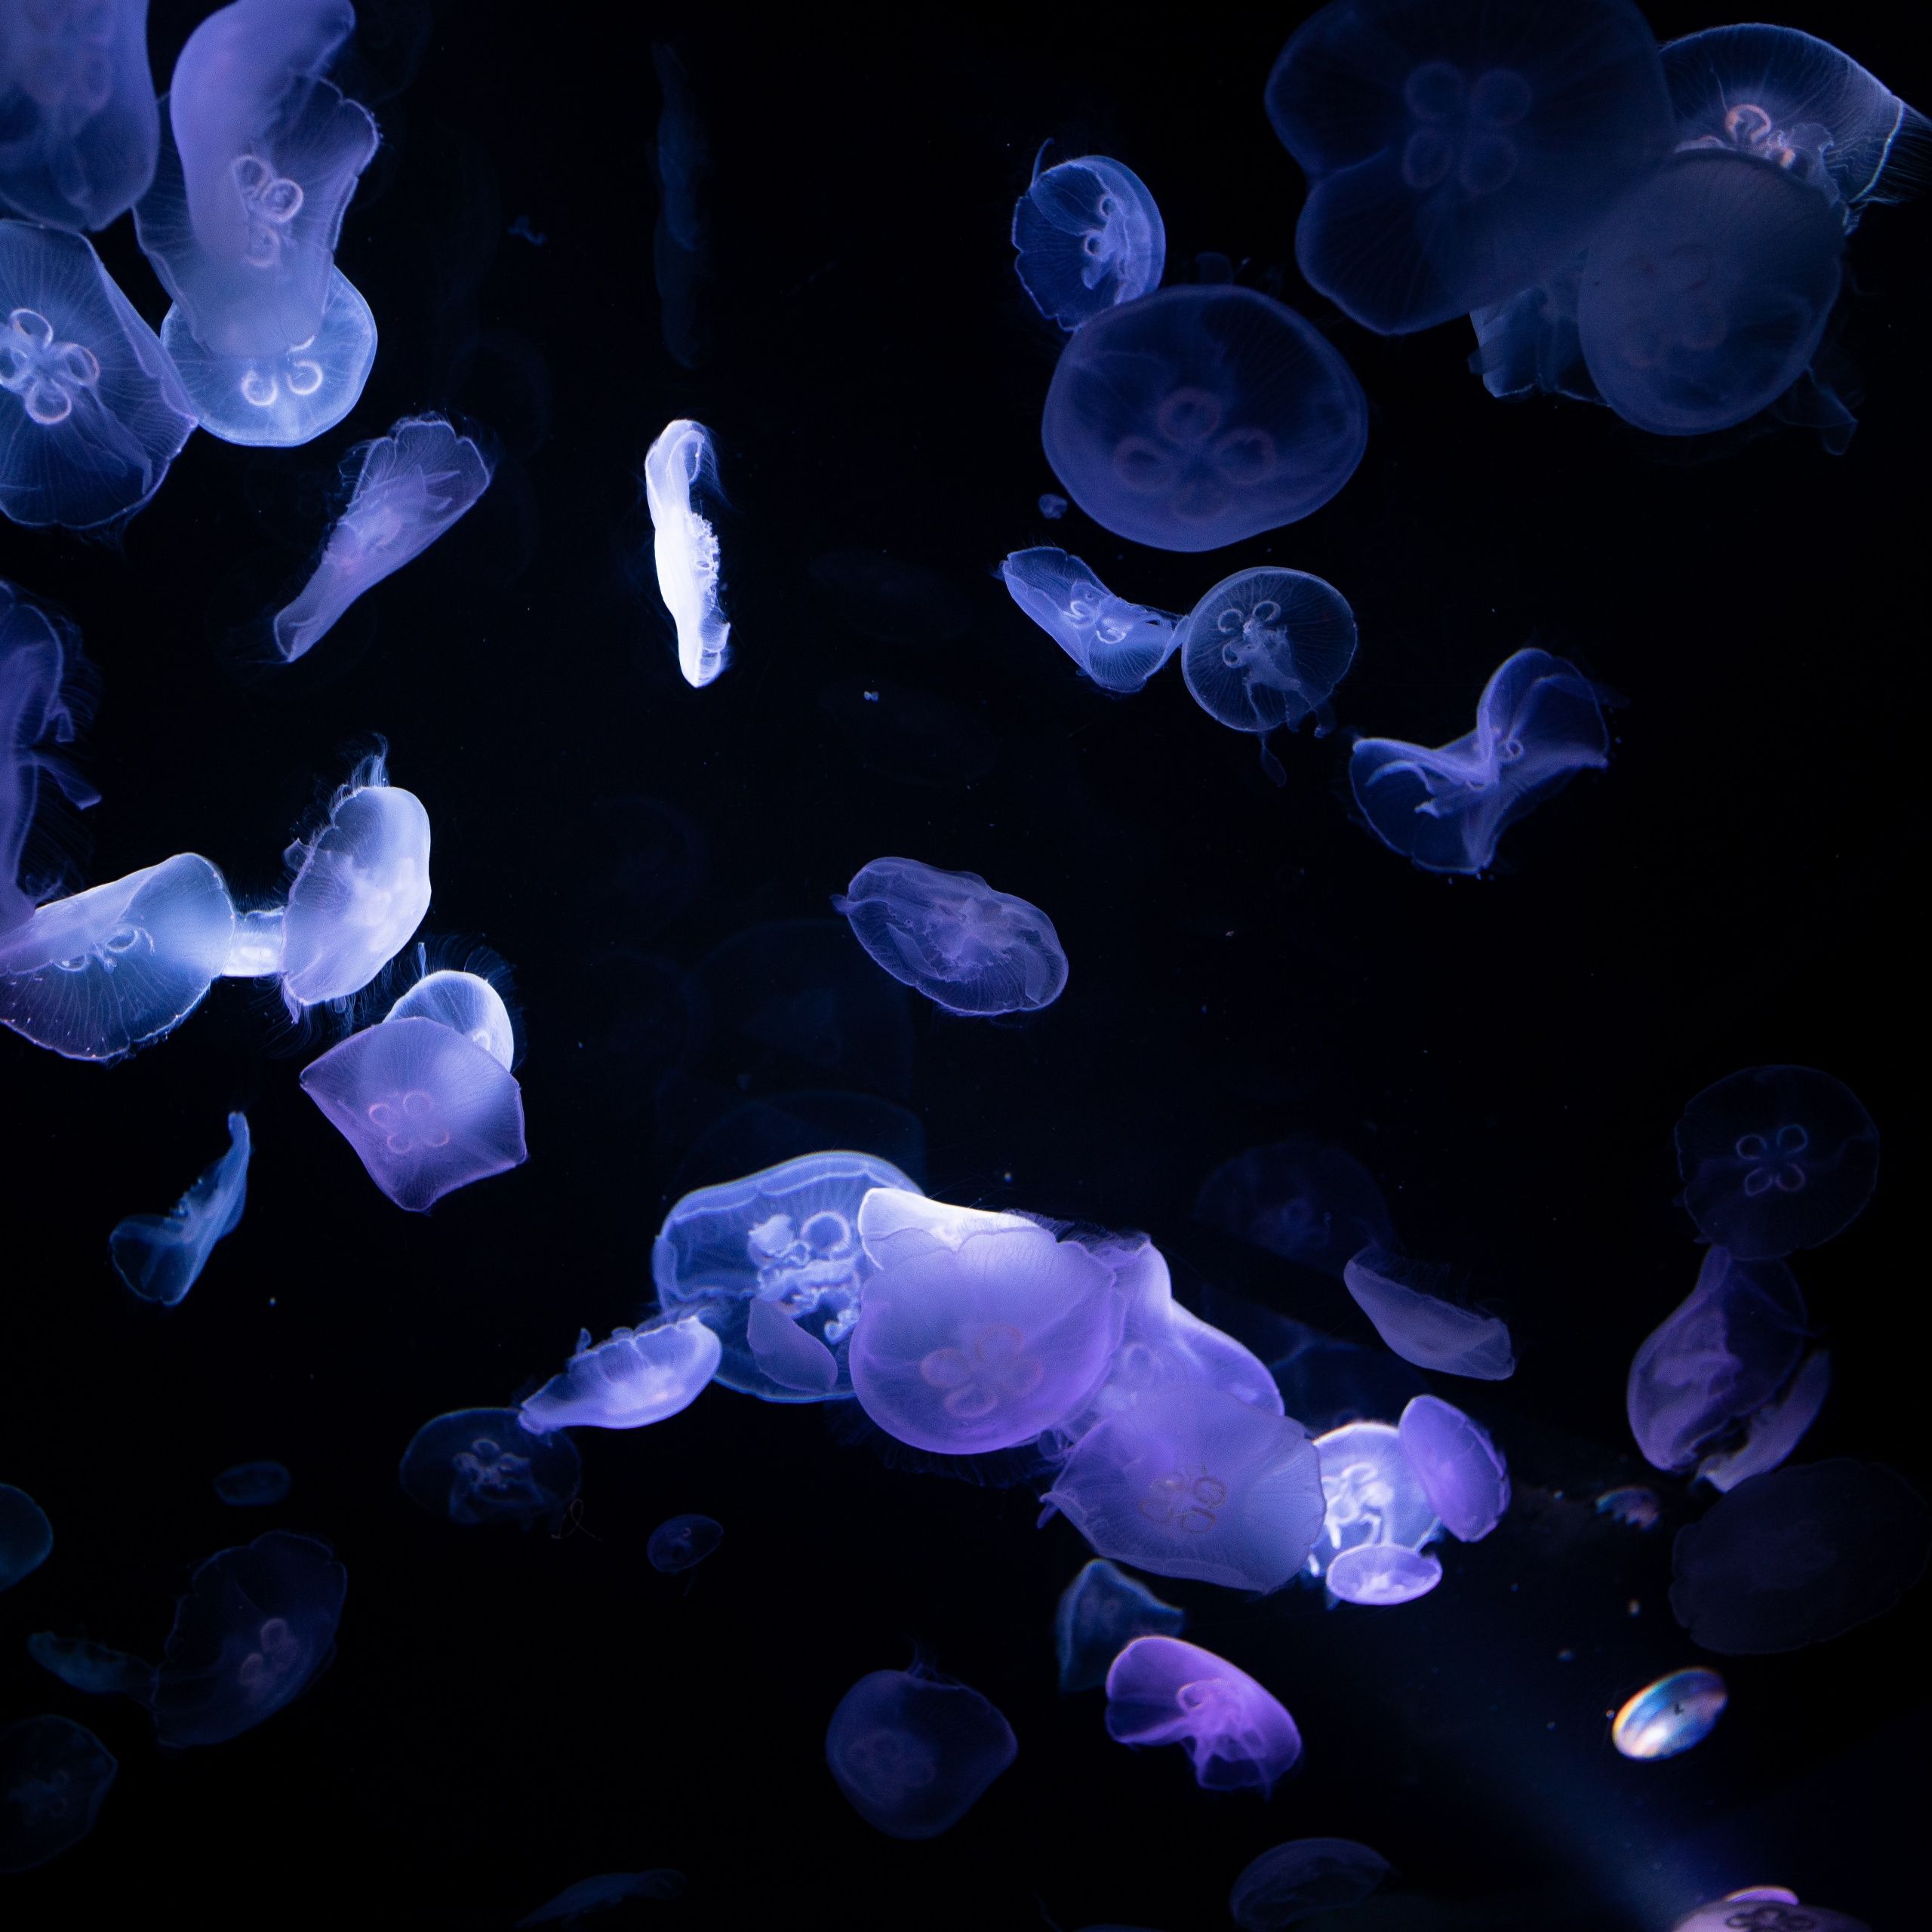 A group of jellyfish swimming in the dark - Underwater